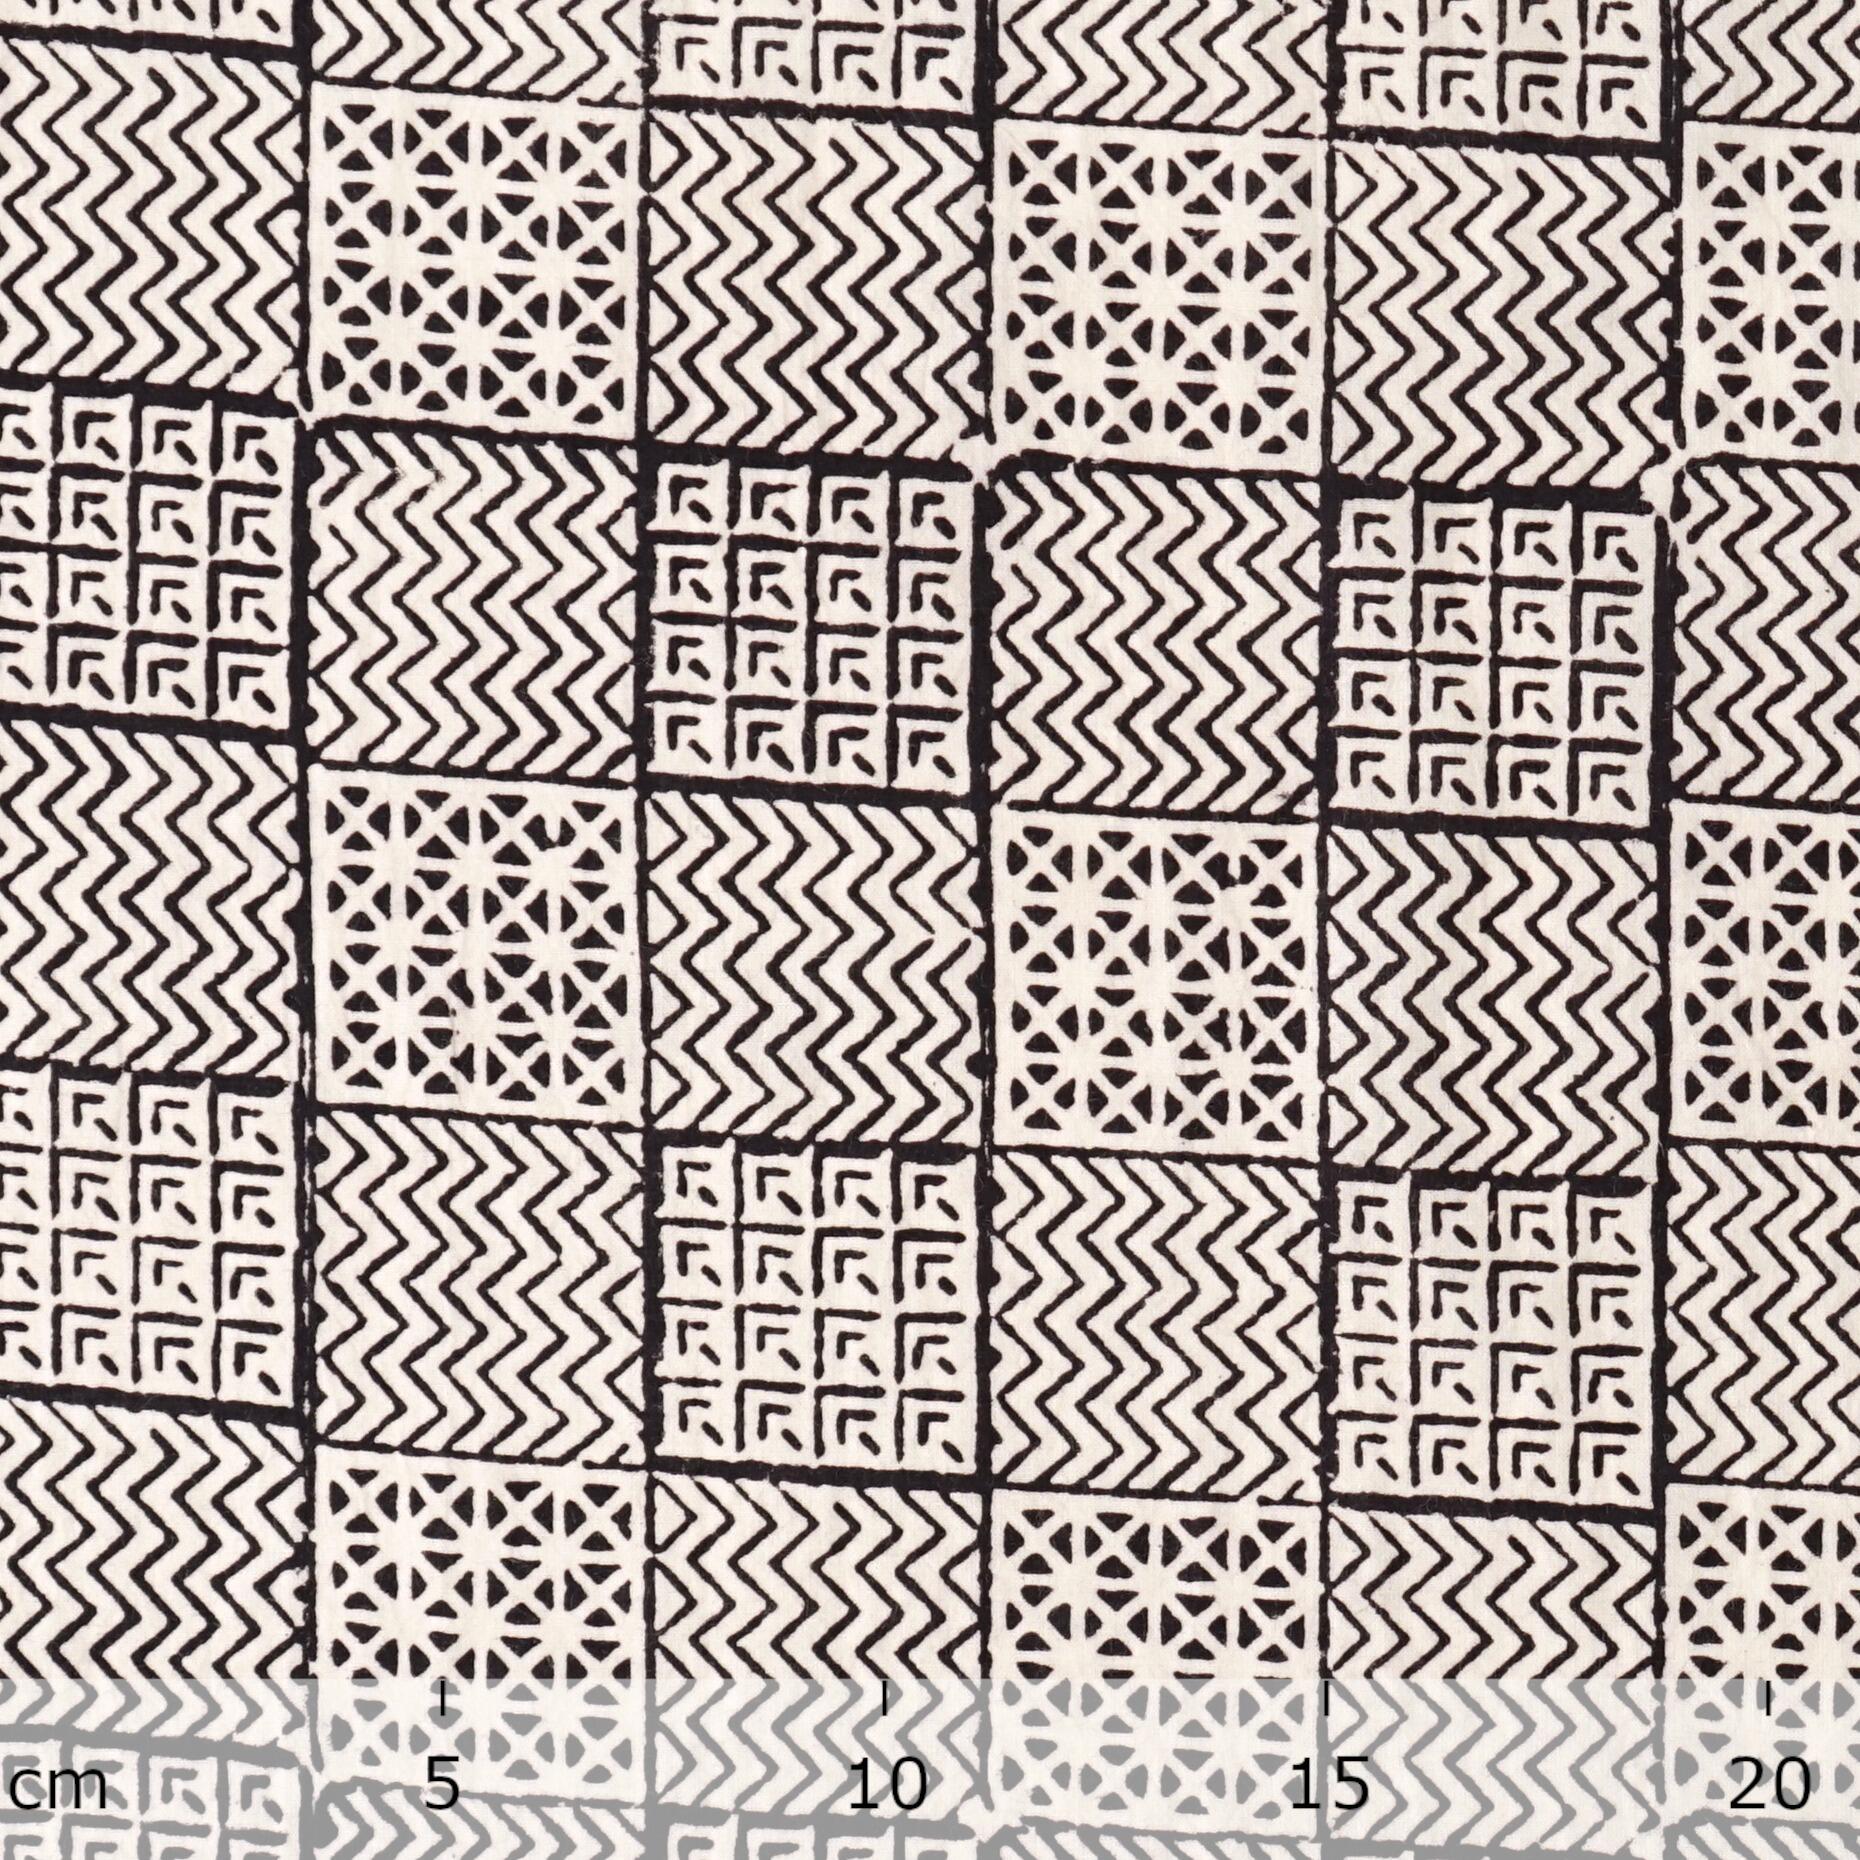 100% Block-Printed Cotton Fabric From India- Bagh - Iron Rust Black Combo Print - Ruler